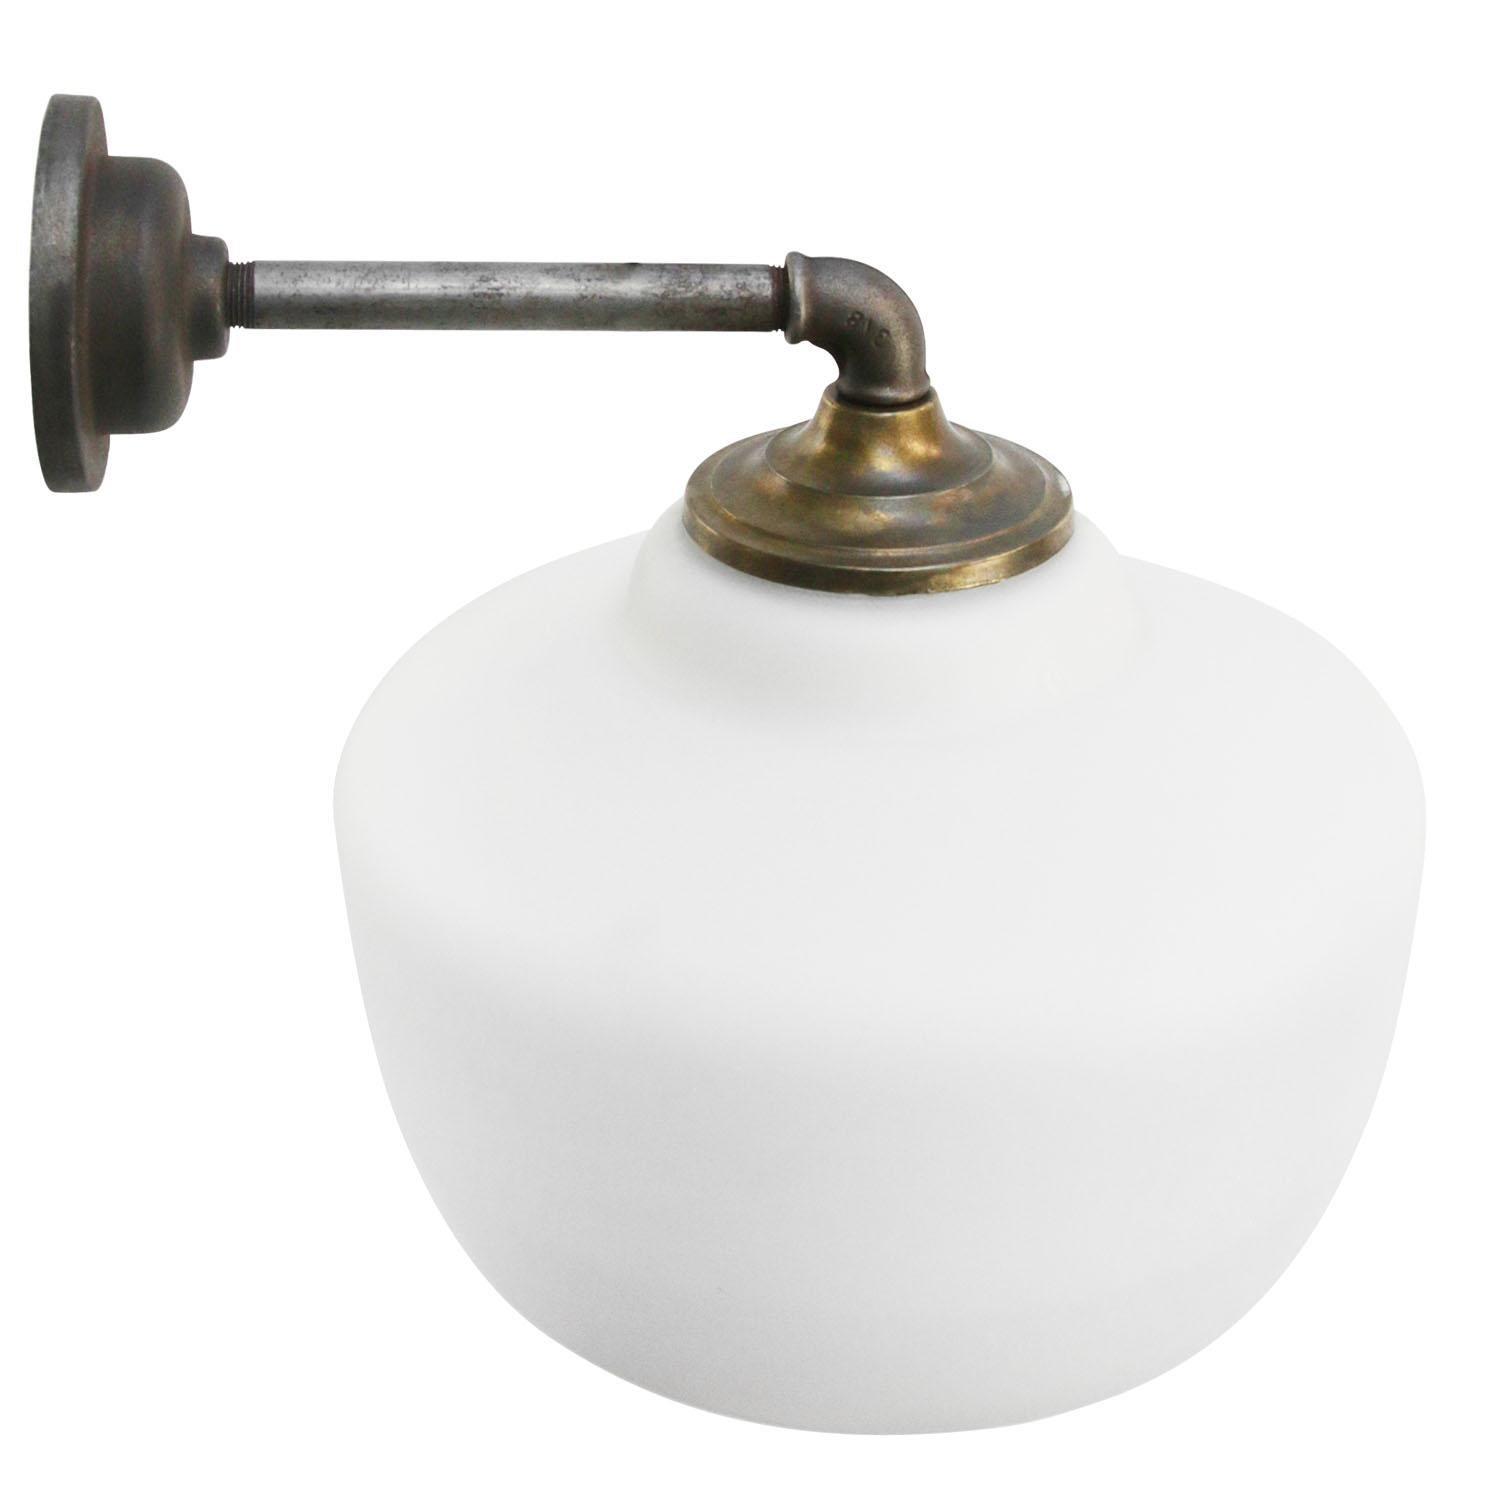 Opaline glass industrial wall light.
Brass top.

Diameter cast iron wall piece: 10.5 cm / 4”, 2 holes to secure

Weight: 2.80 kg / 6.2 lb

riced per individual item. All lamps have been made suitable by international standards for incandescent light